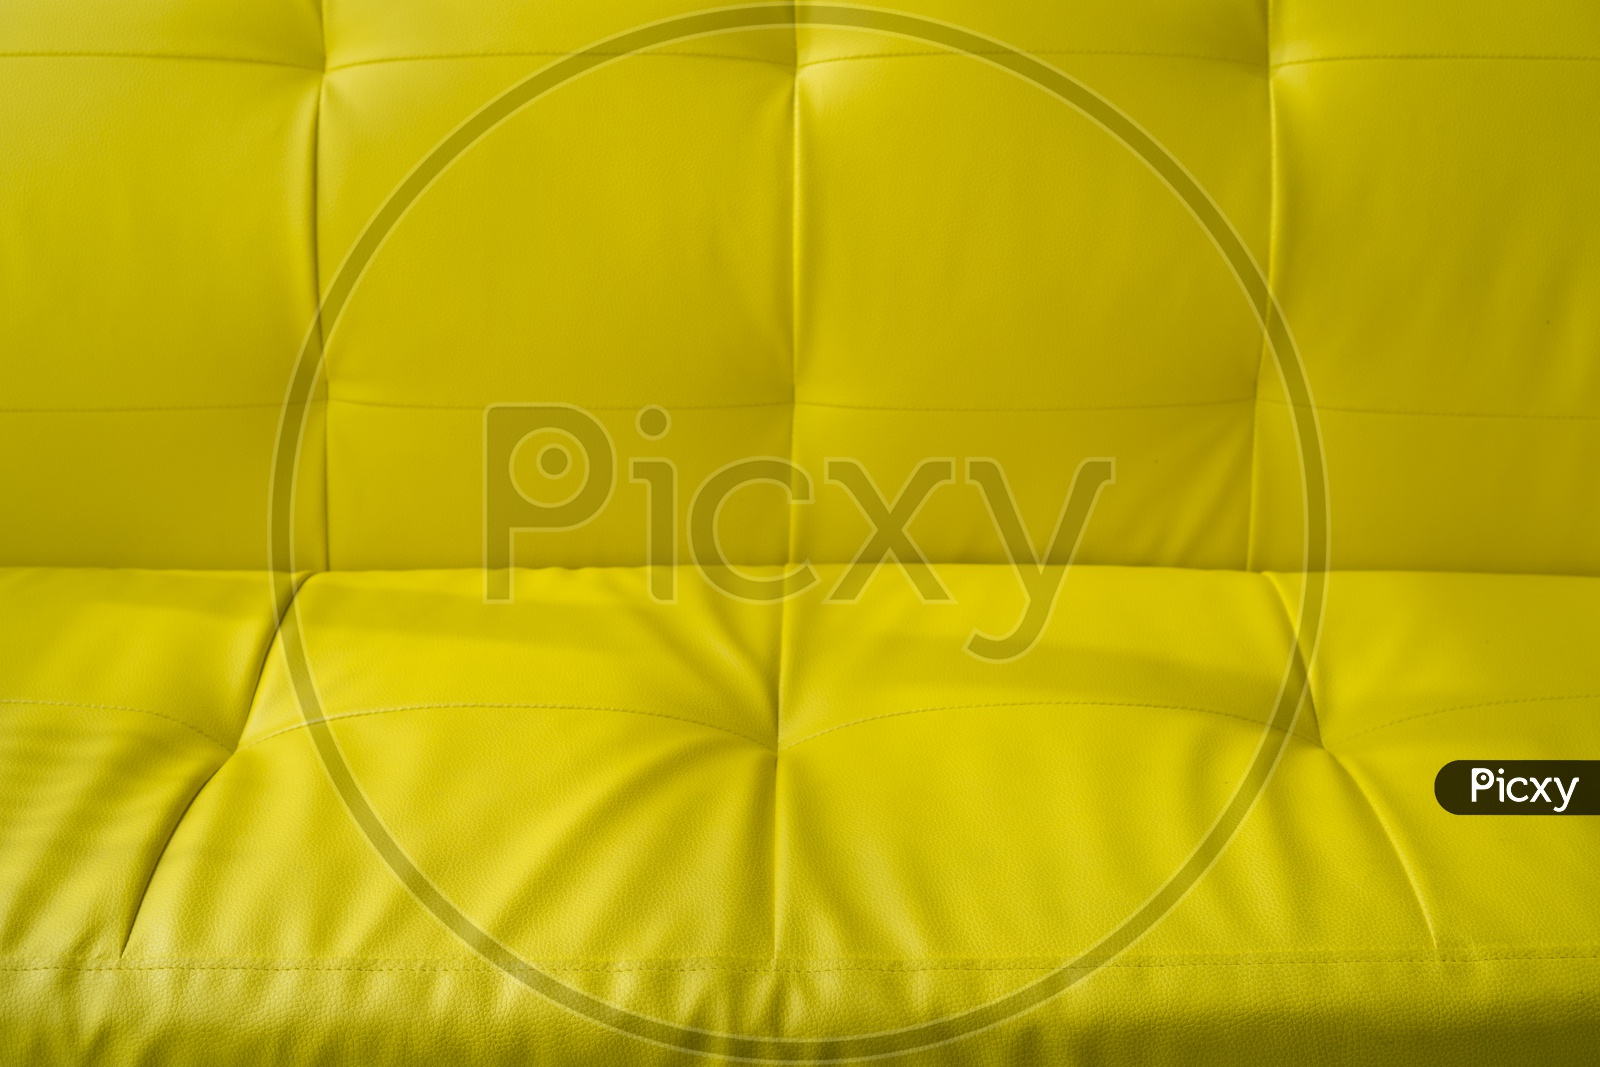 abstract texture background of yellow sofa